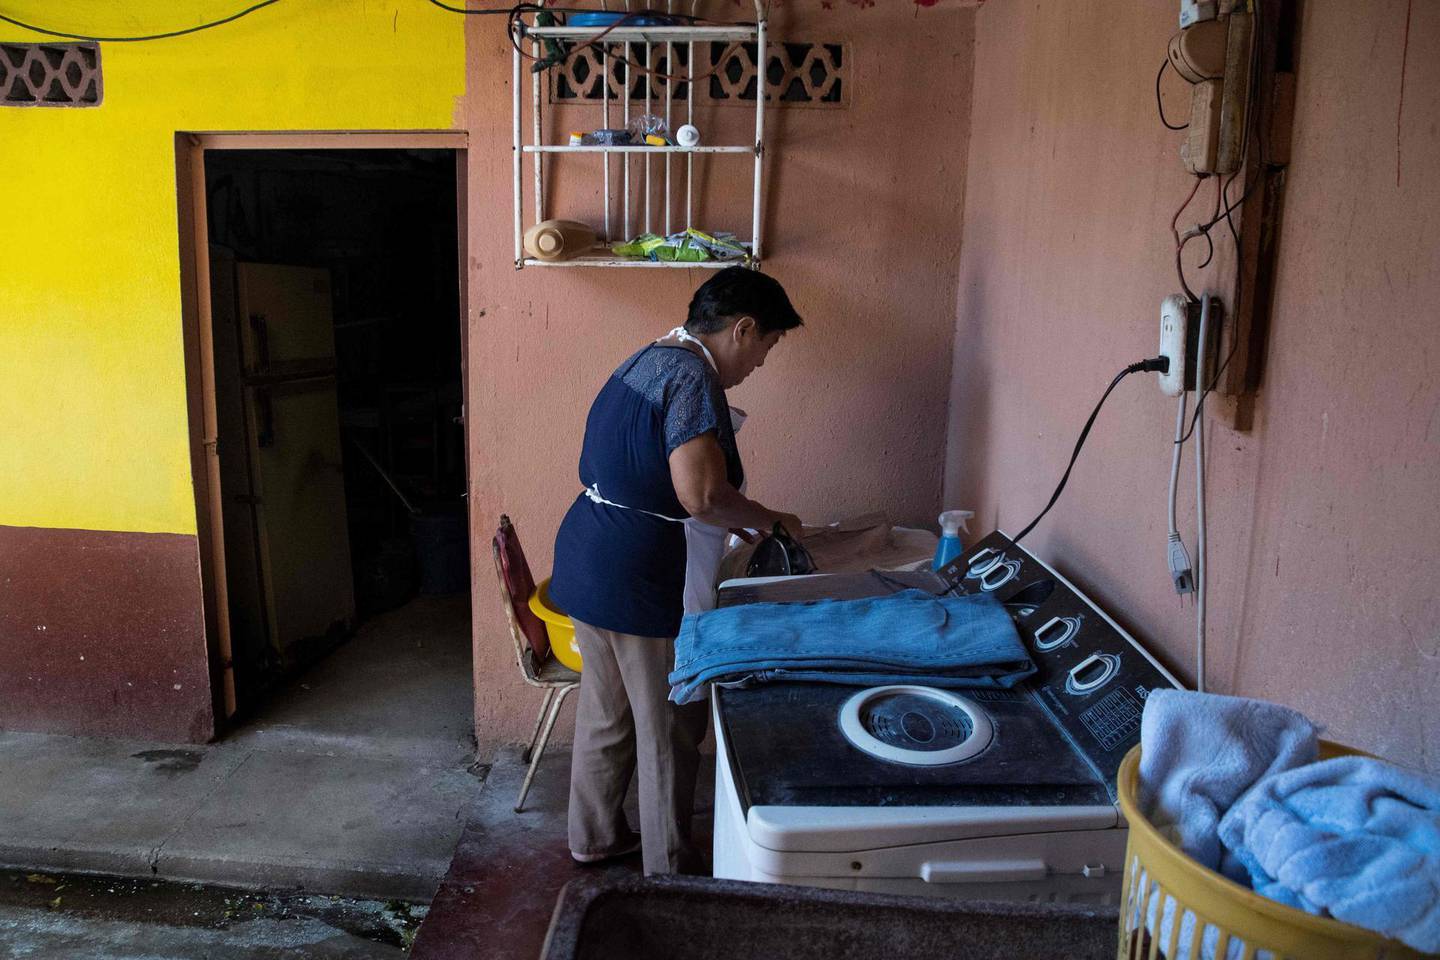 Costa Rican domestic worker Aracelly Calvo irons clothes at the house where she works in Guanacaste, Canas, Costa Rica on January 04, 2019.  The working conditions of domestics in Latin America, to whom director Alfonso Cuaron pays homage in his recent movie 'Roma', is slowly reaching a legal framework. Whilst several countries in the region have established laws for the sector in the last decade, other simultaneous realities such as economic crises and migration, are hampering those conquests and ambitions of formality. / AFP / Ezequiel BECERRA
